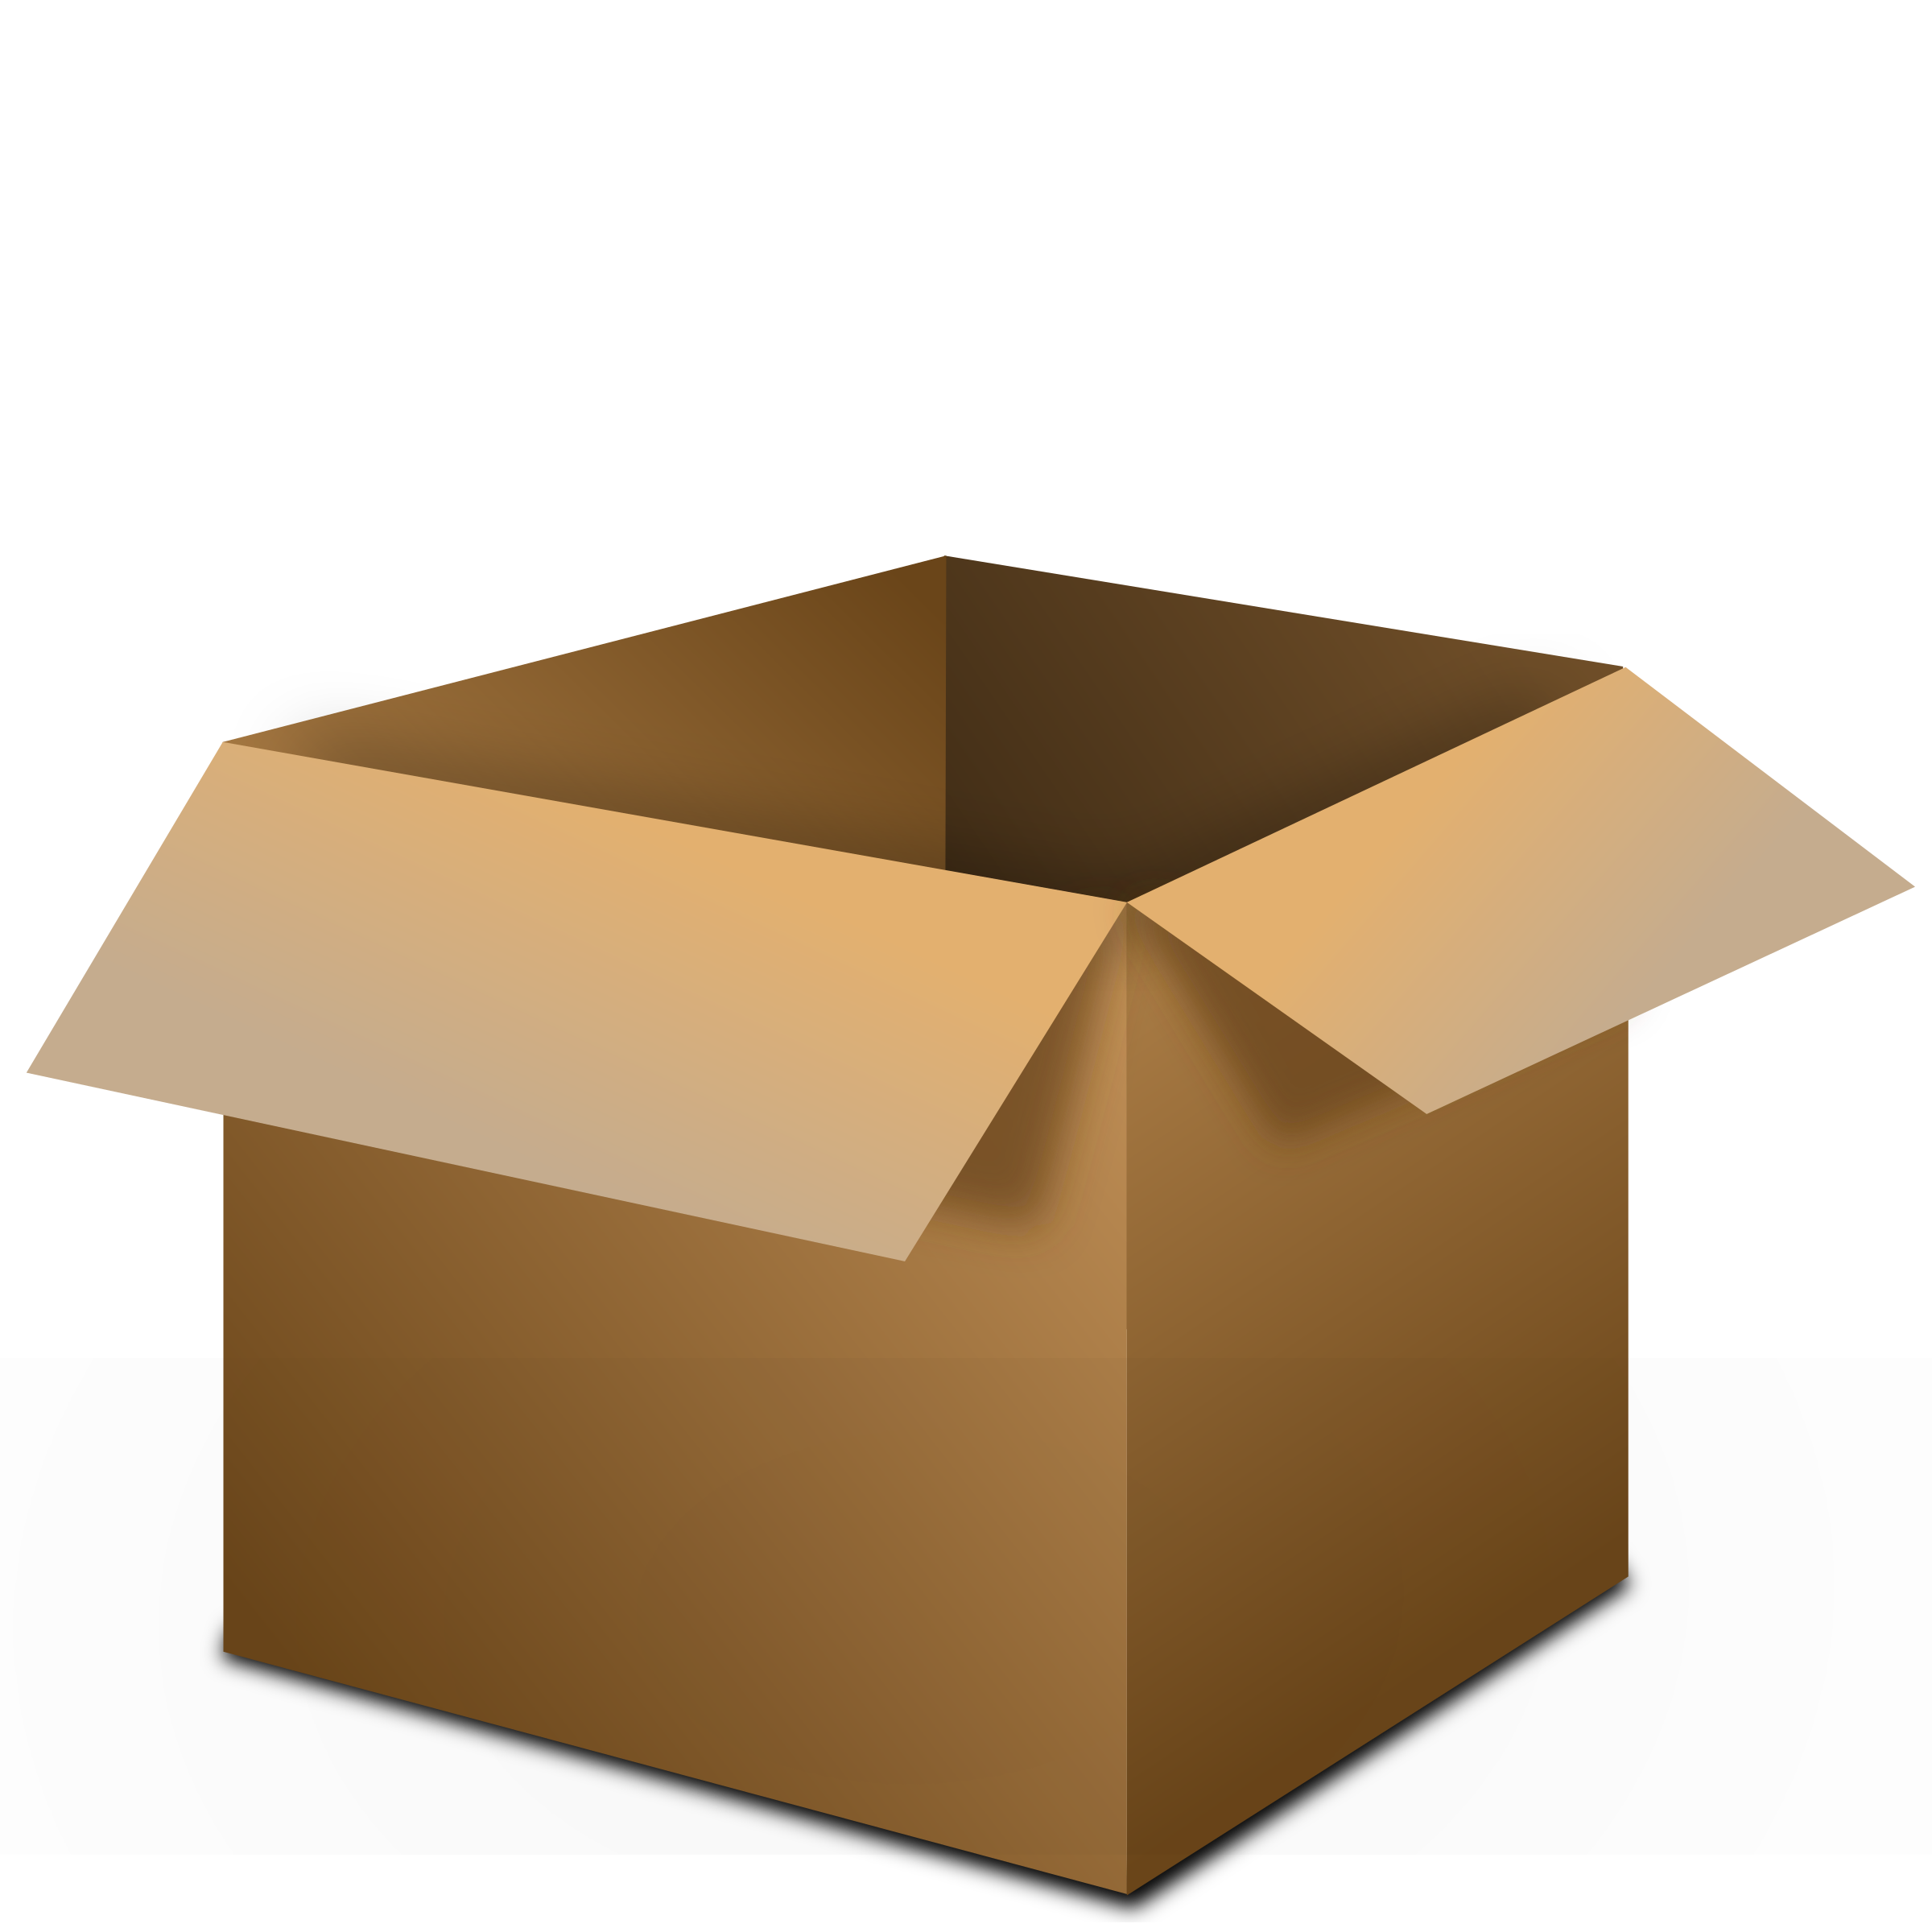 Clipart no opening boxes 